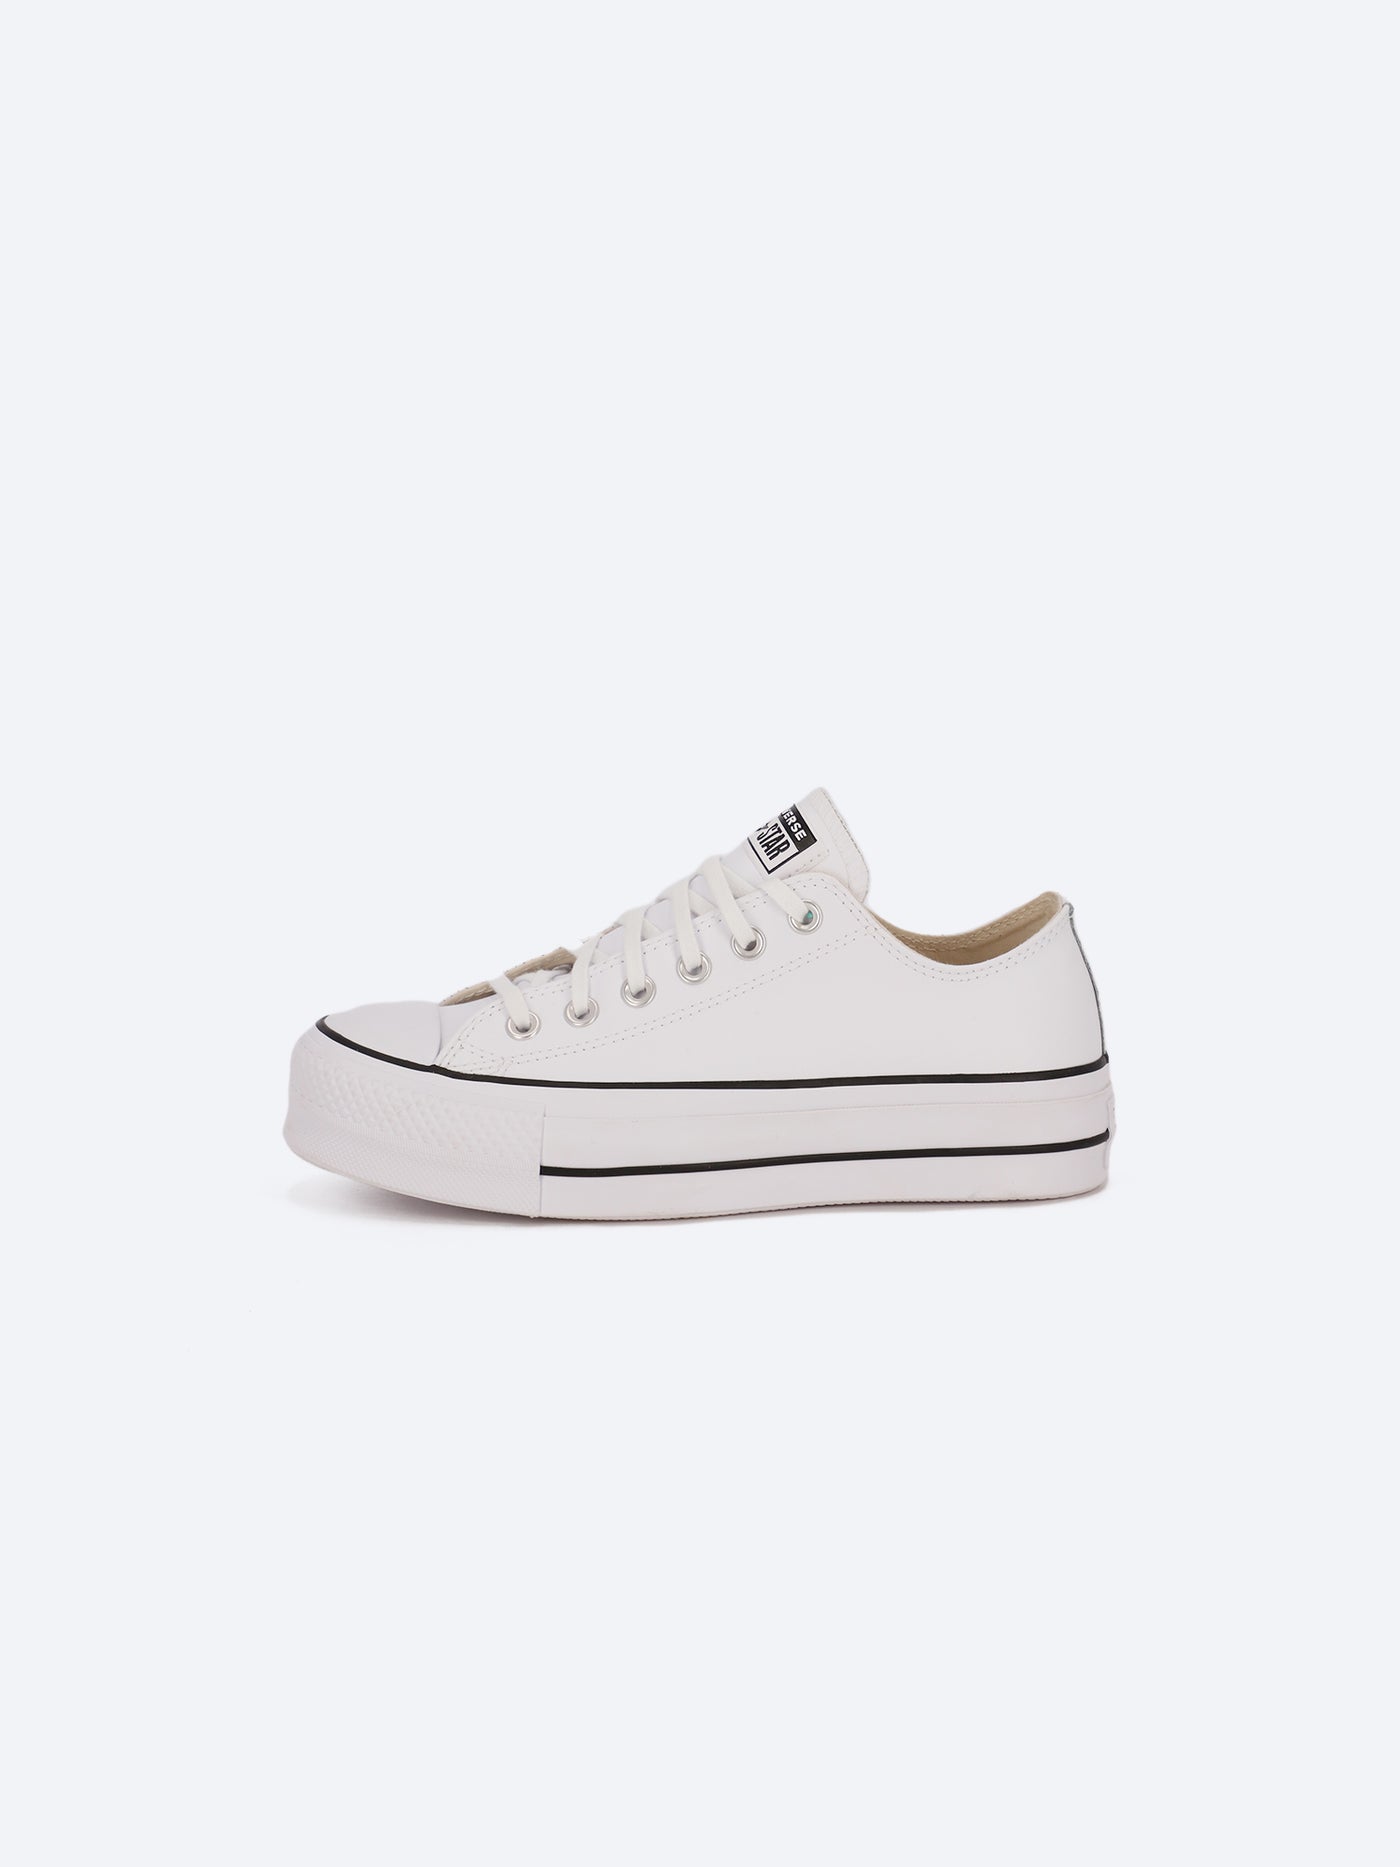 Chuck Taylor All Star Platform Leather Low Top Women Sneakers